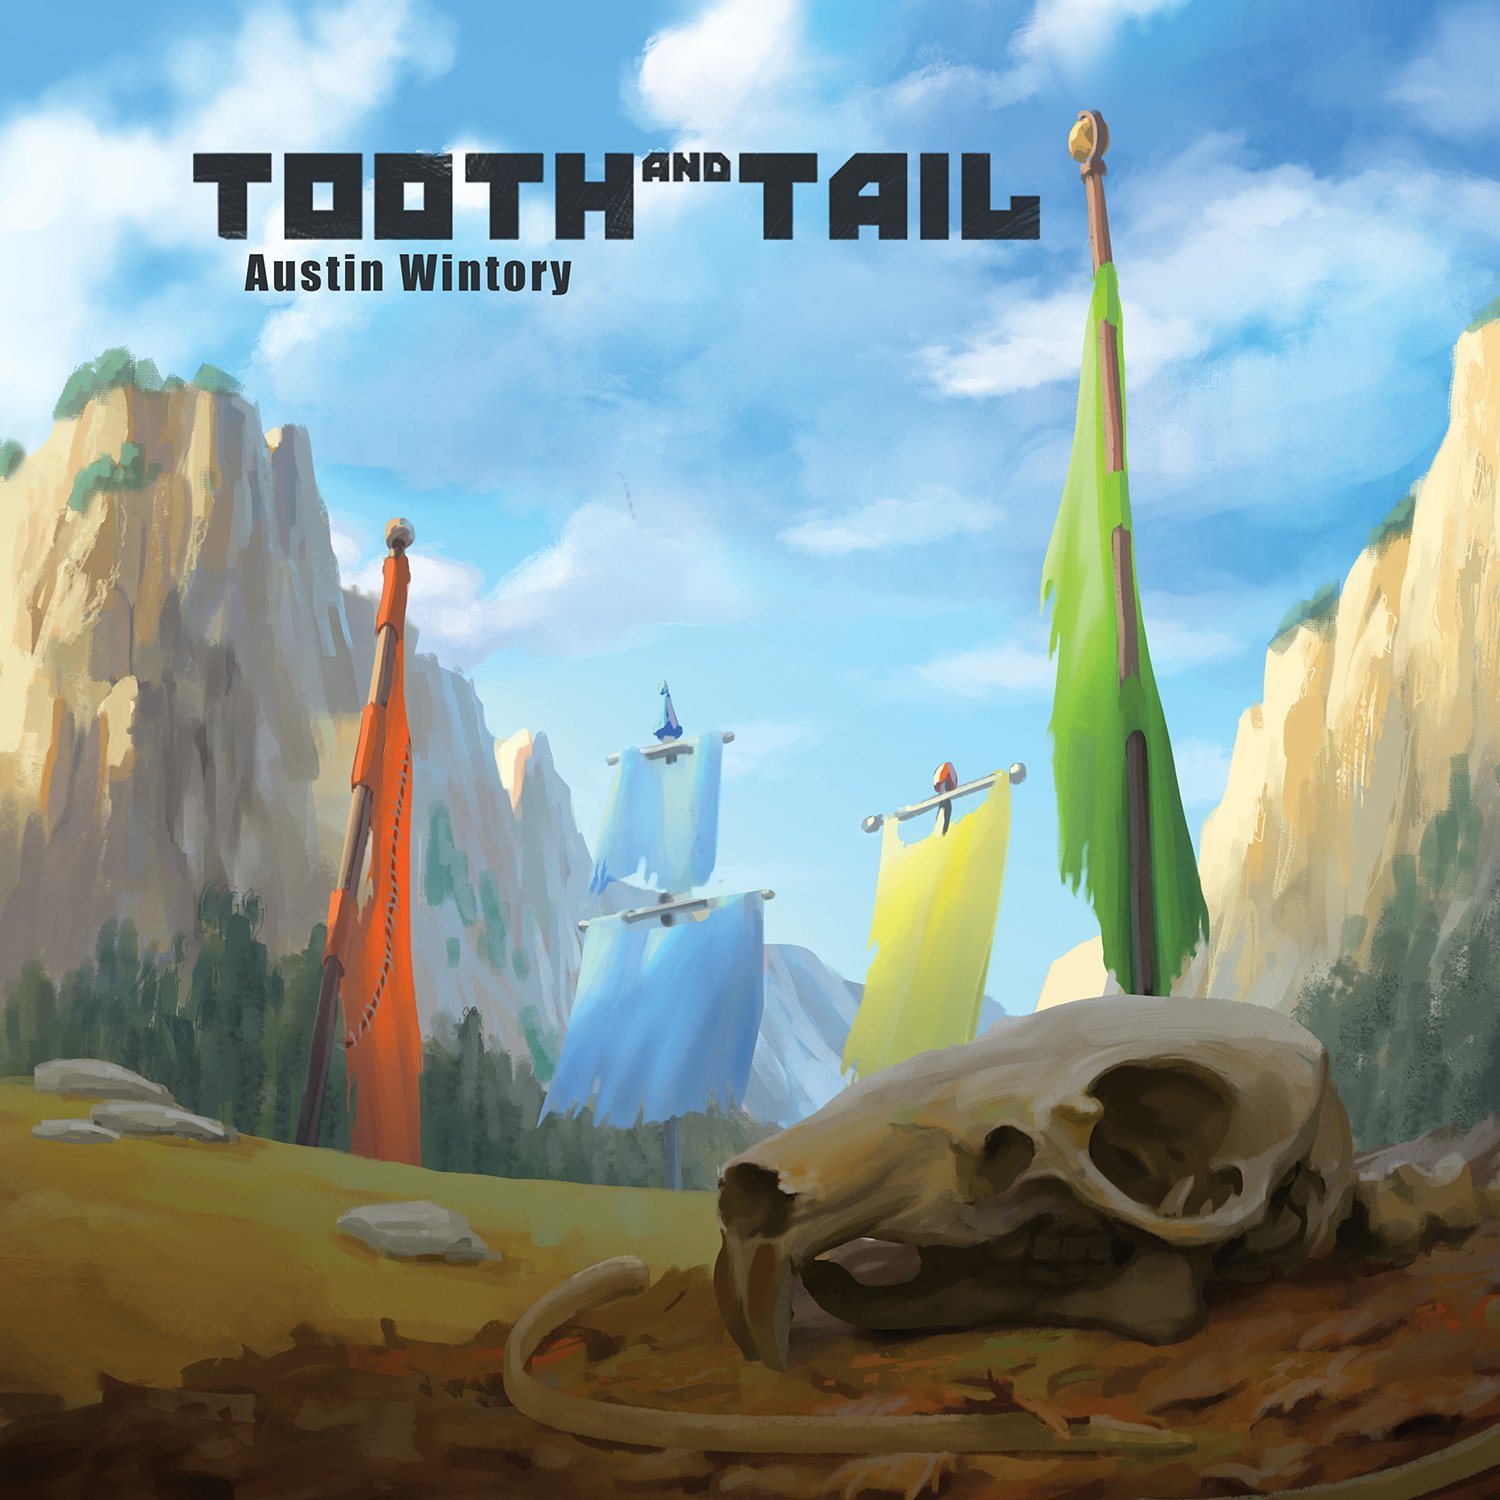 Игра музыкальный хвост. Tooth and Tail игра. Austin Wintory. Tooth and Tail Hopper. Bachram by Austin Wintory.